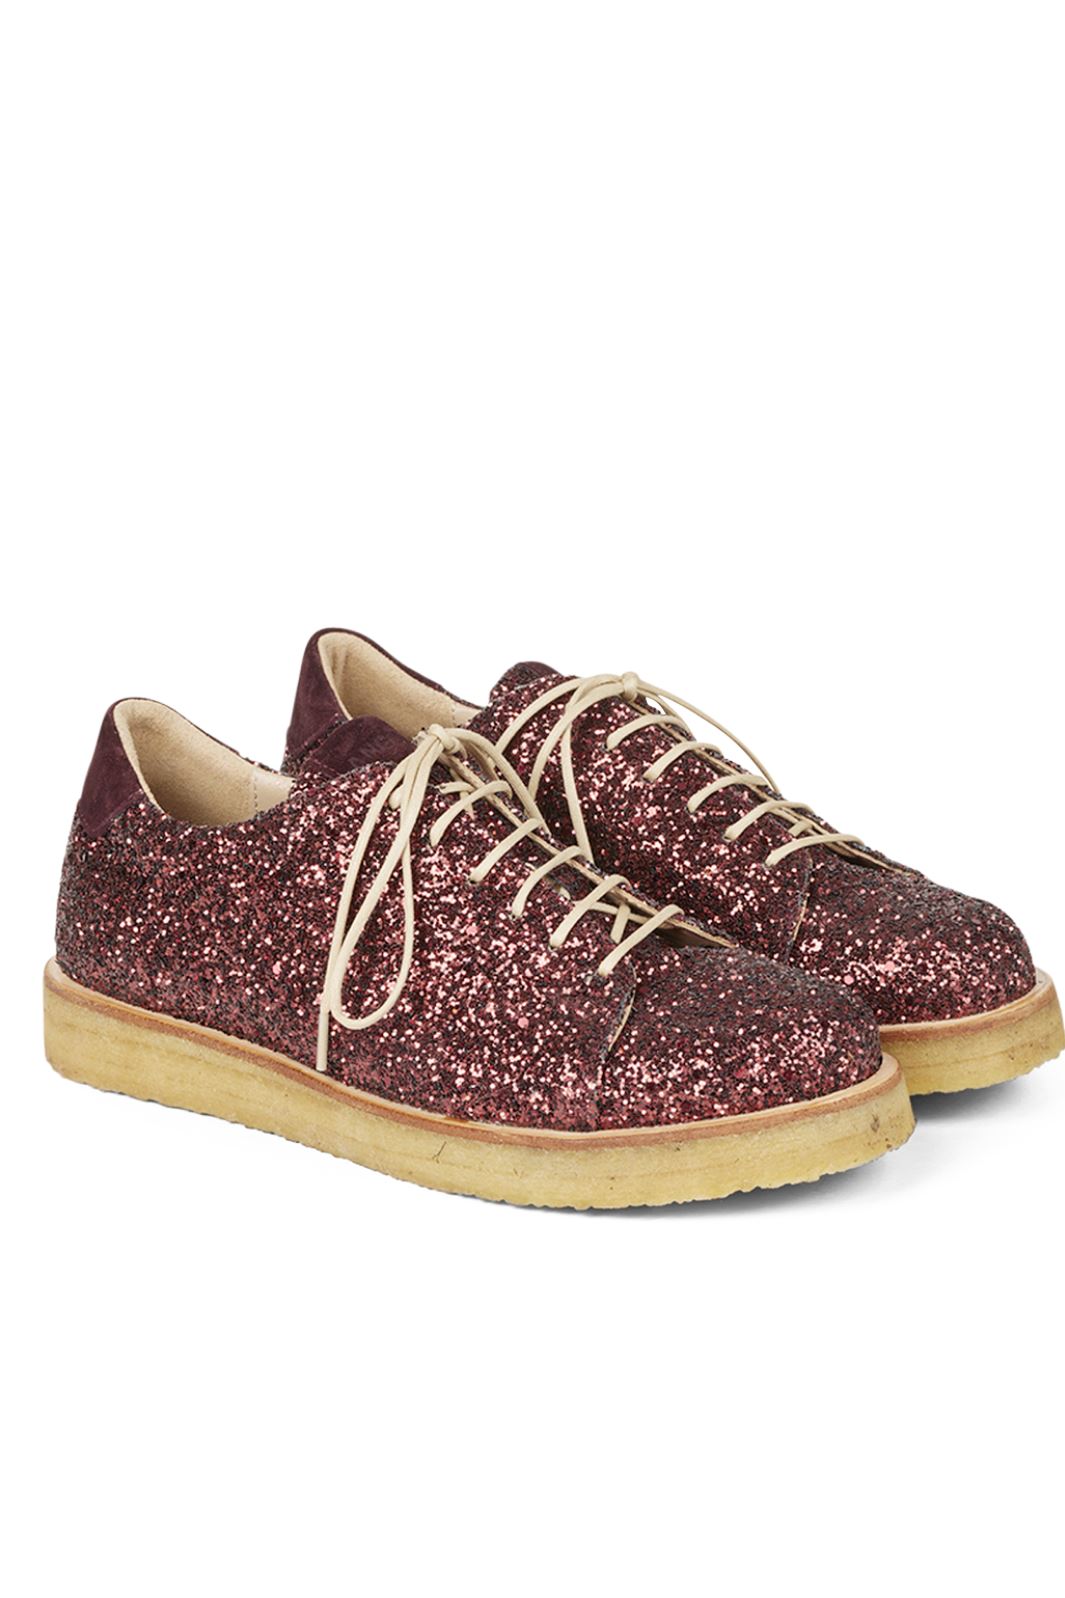 Angulus - Shoes - flat - with lace - 1710/2195 Bordeaux Glitter Sneakers 